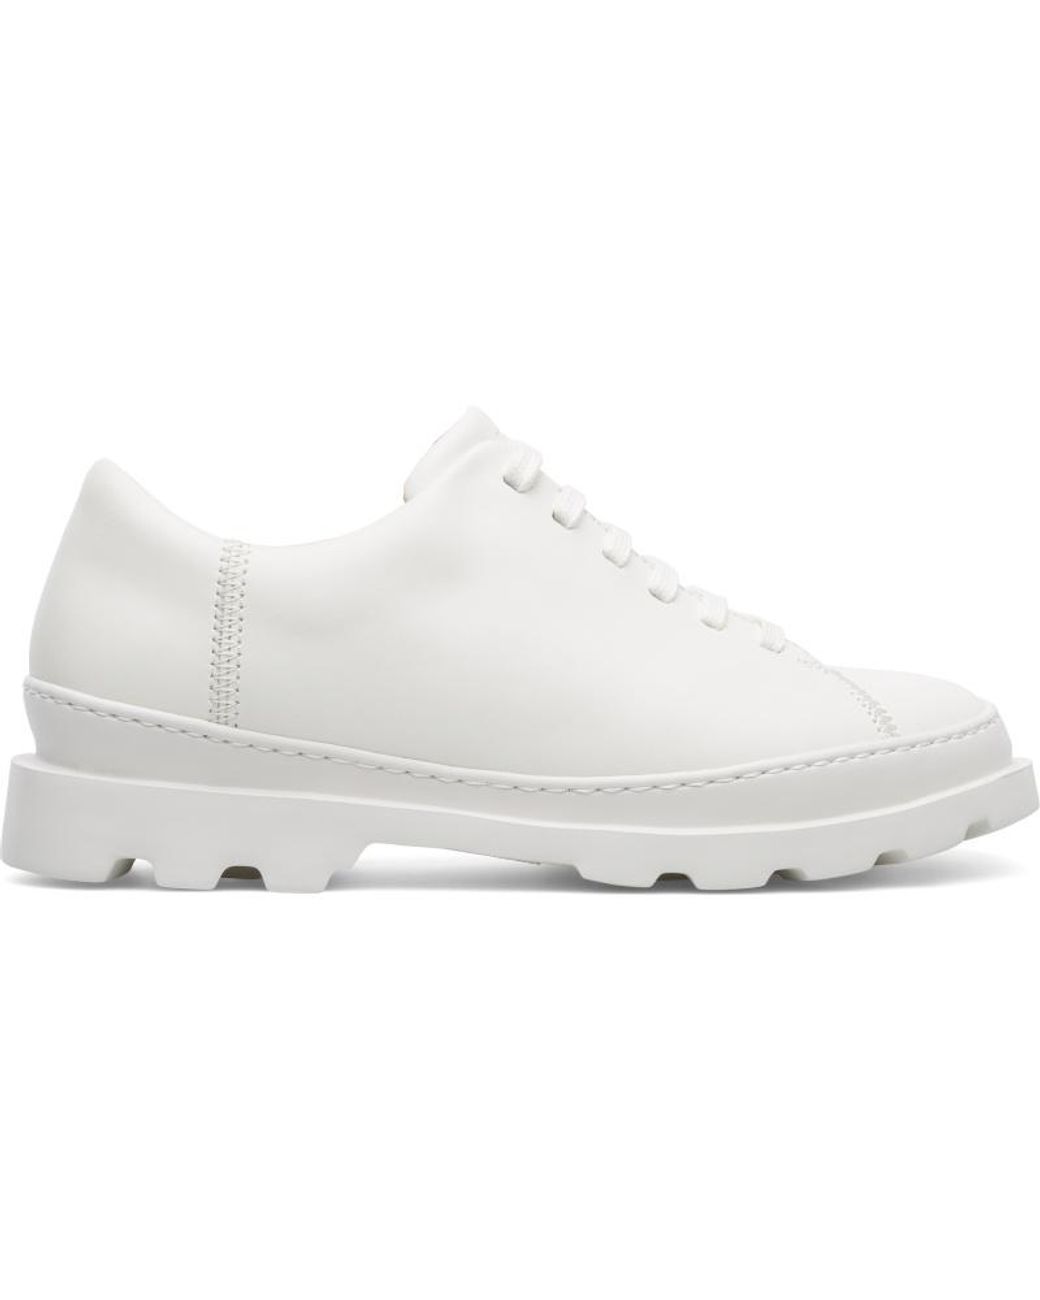 Camper Leather Brutus Formal Shoes in White - Lyst